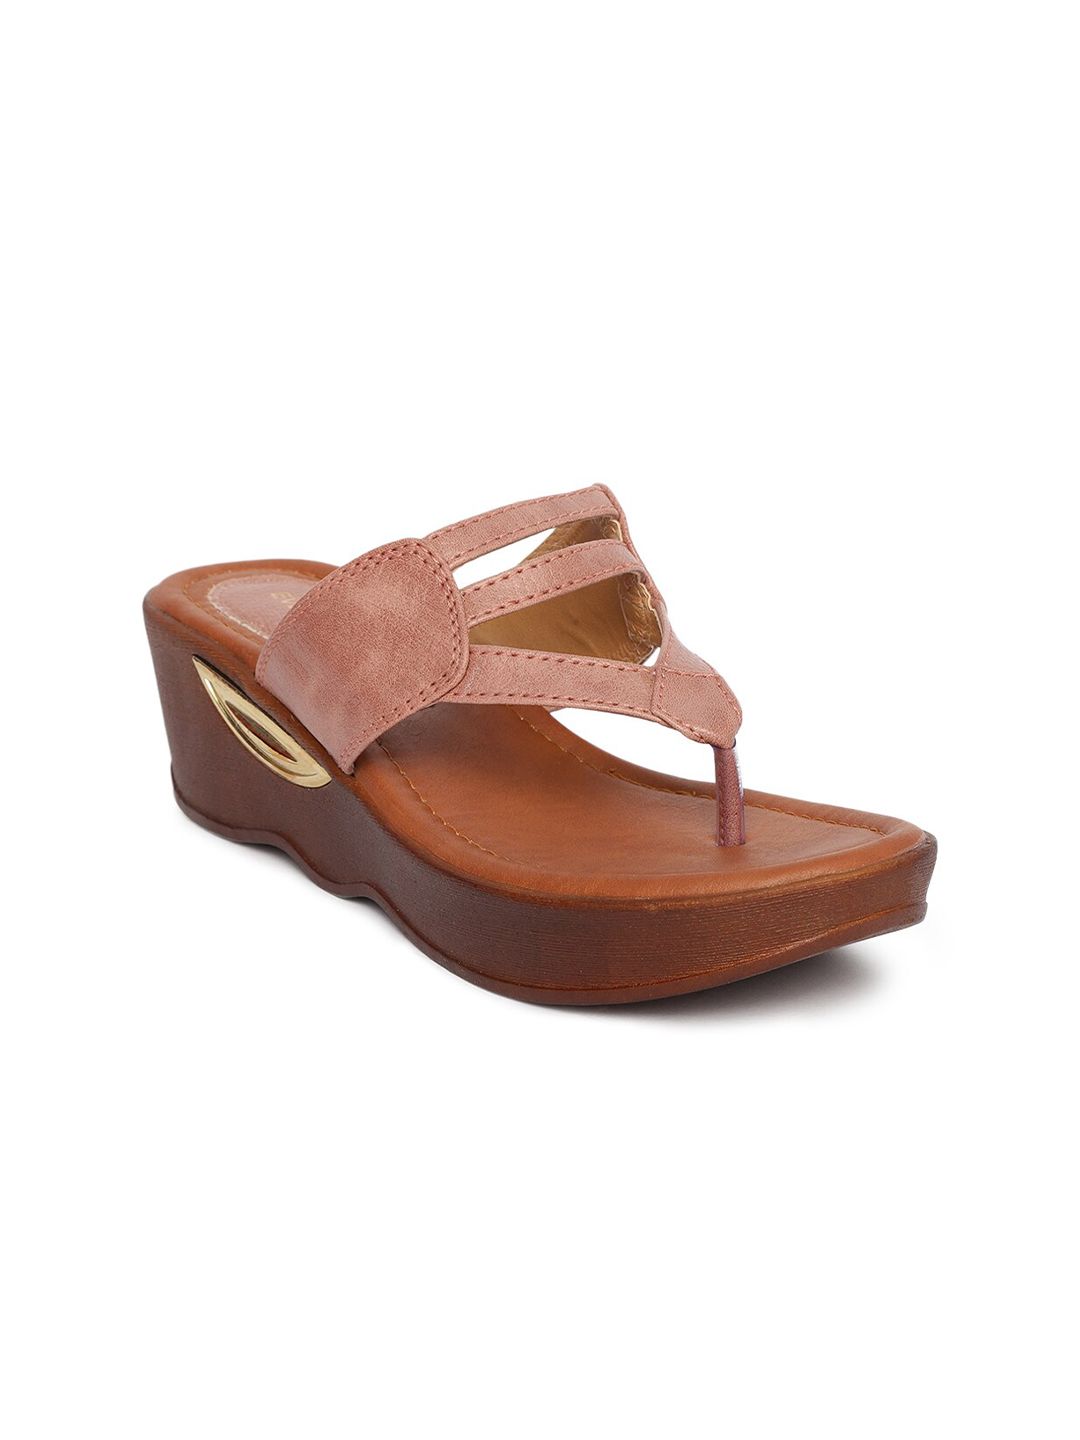 EVERLY Pink & Brown Solid Wedges Price in India